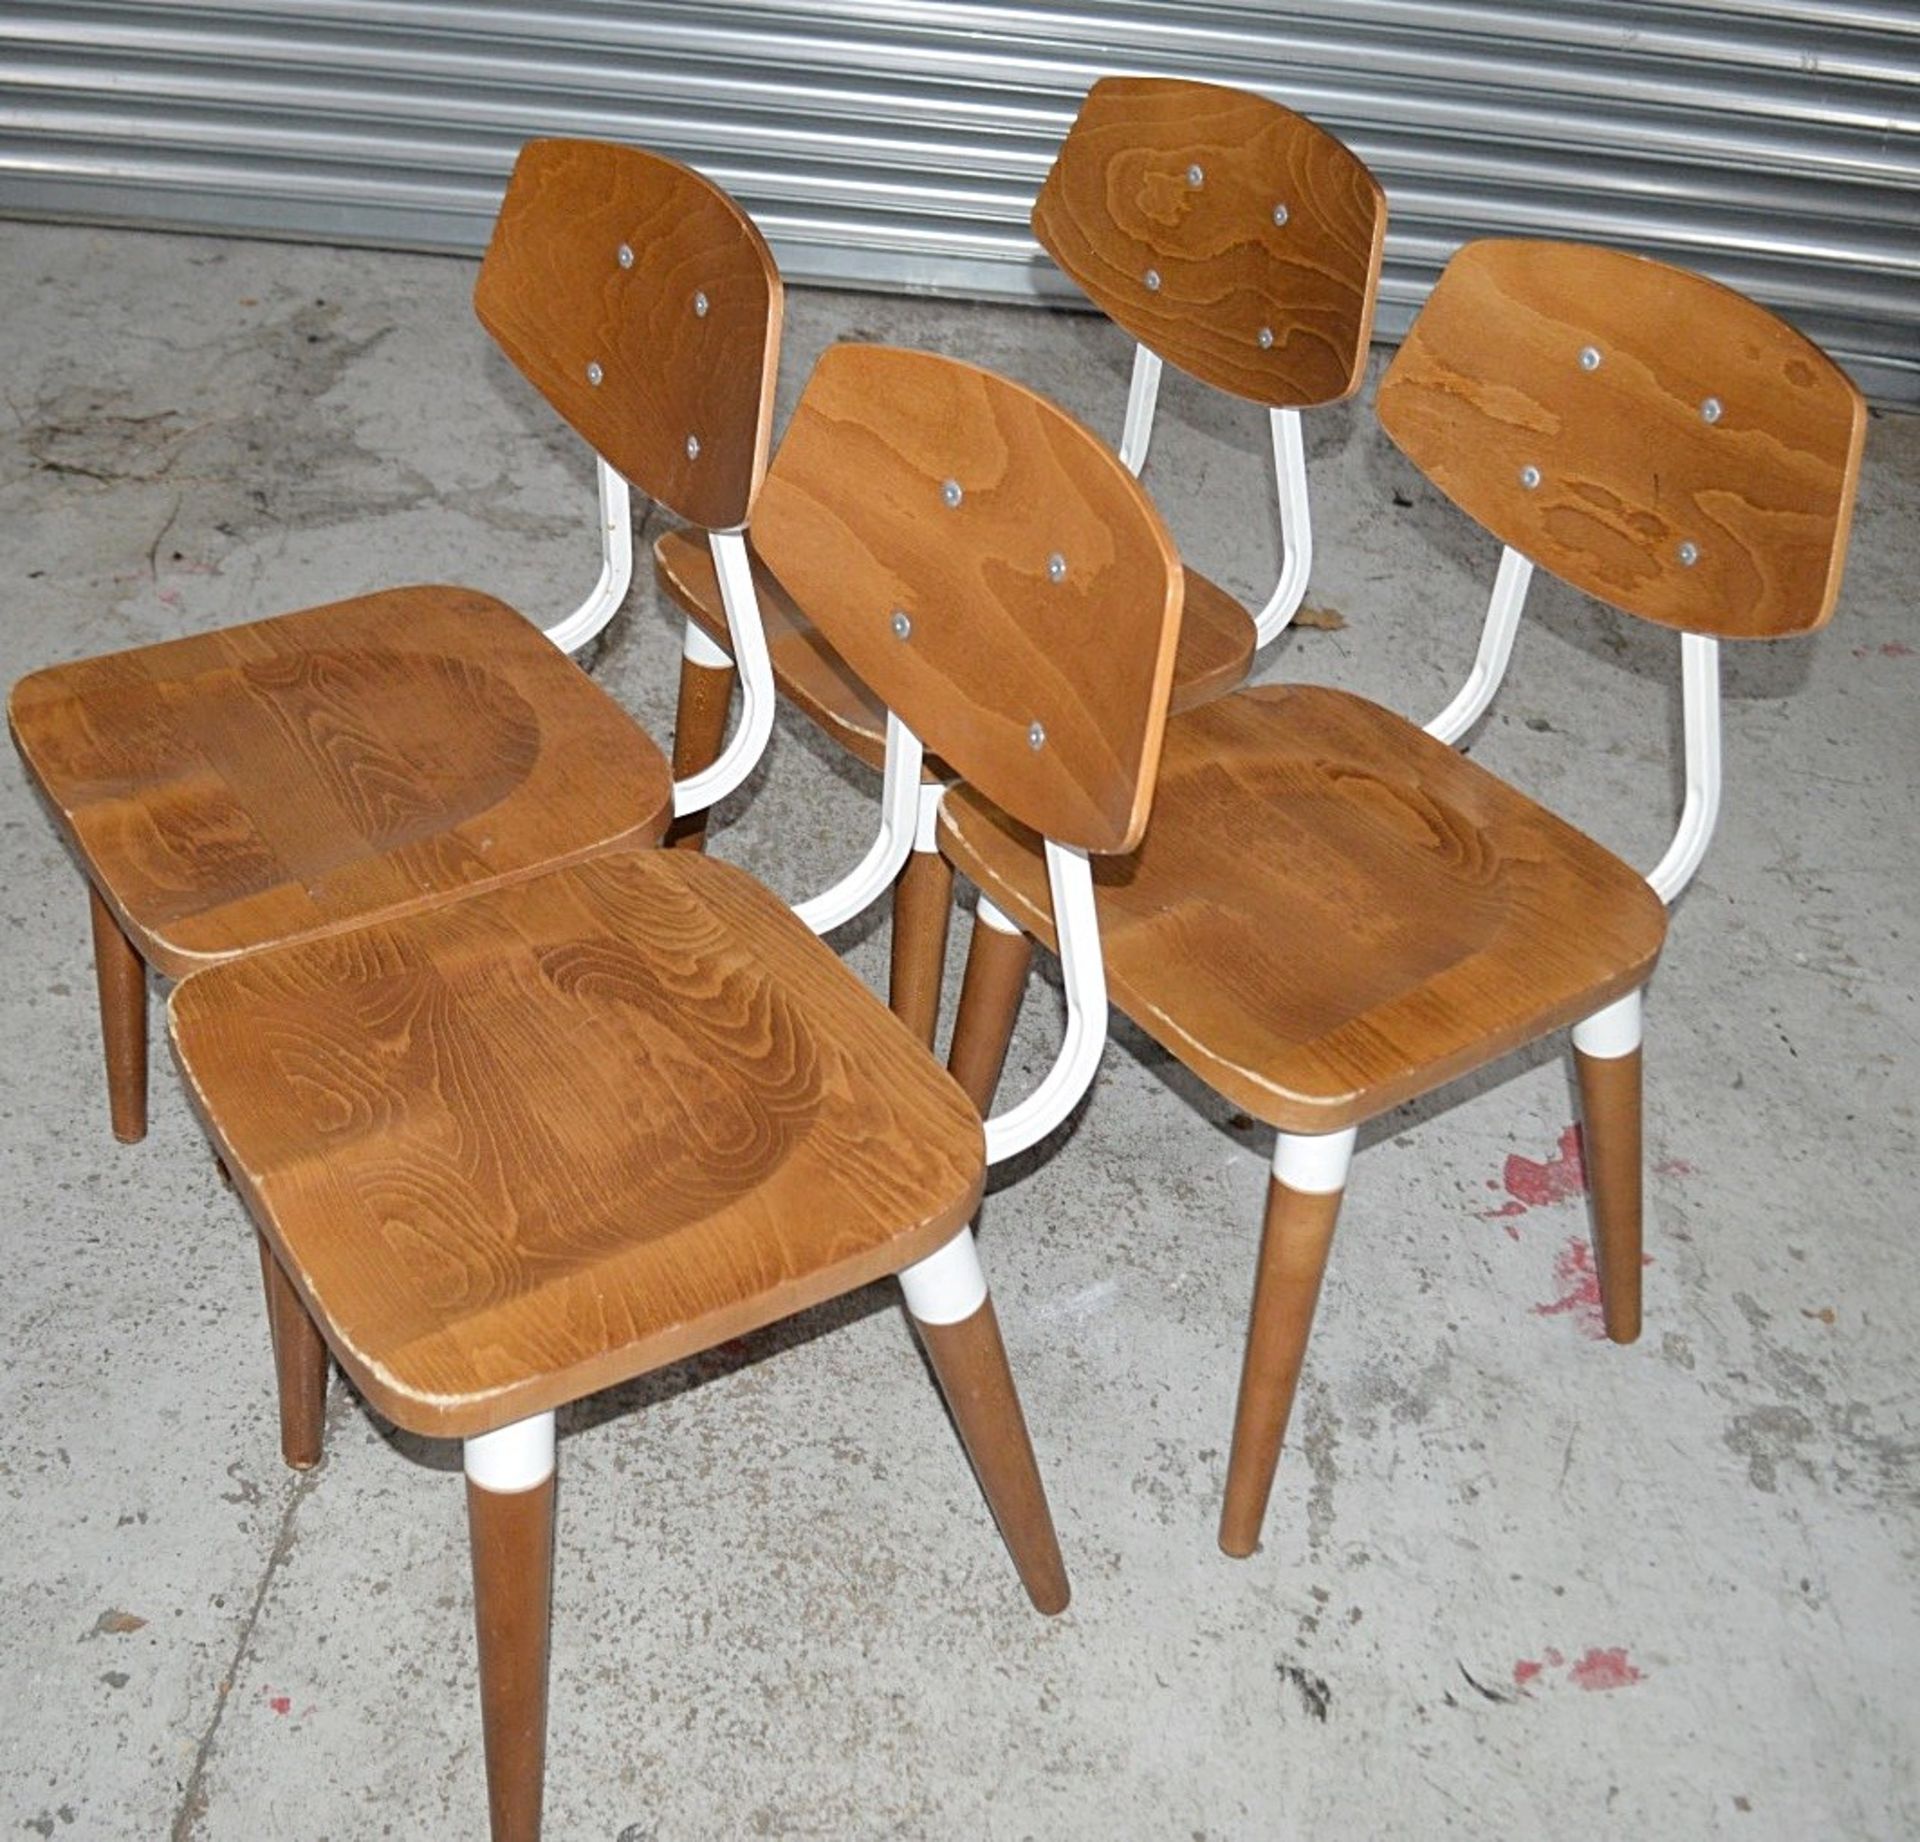 8 x Contemporary Commercial Dining Chairs With A Sturdy Wood And Metal Construction - Image 2 of 10